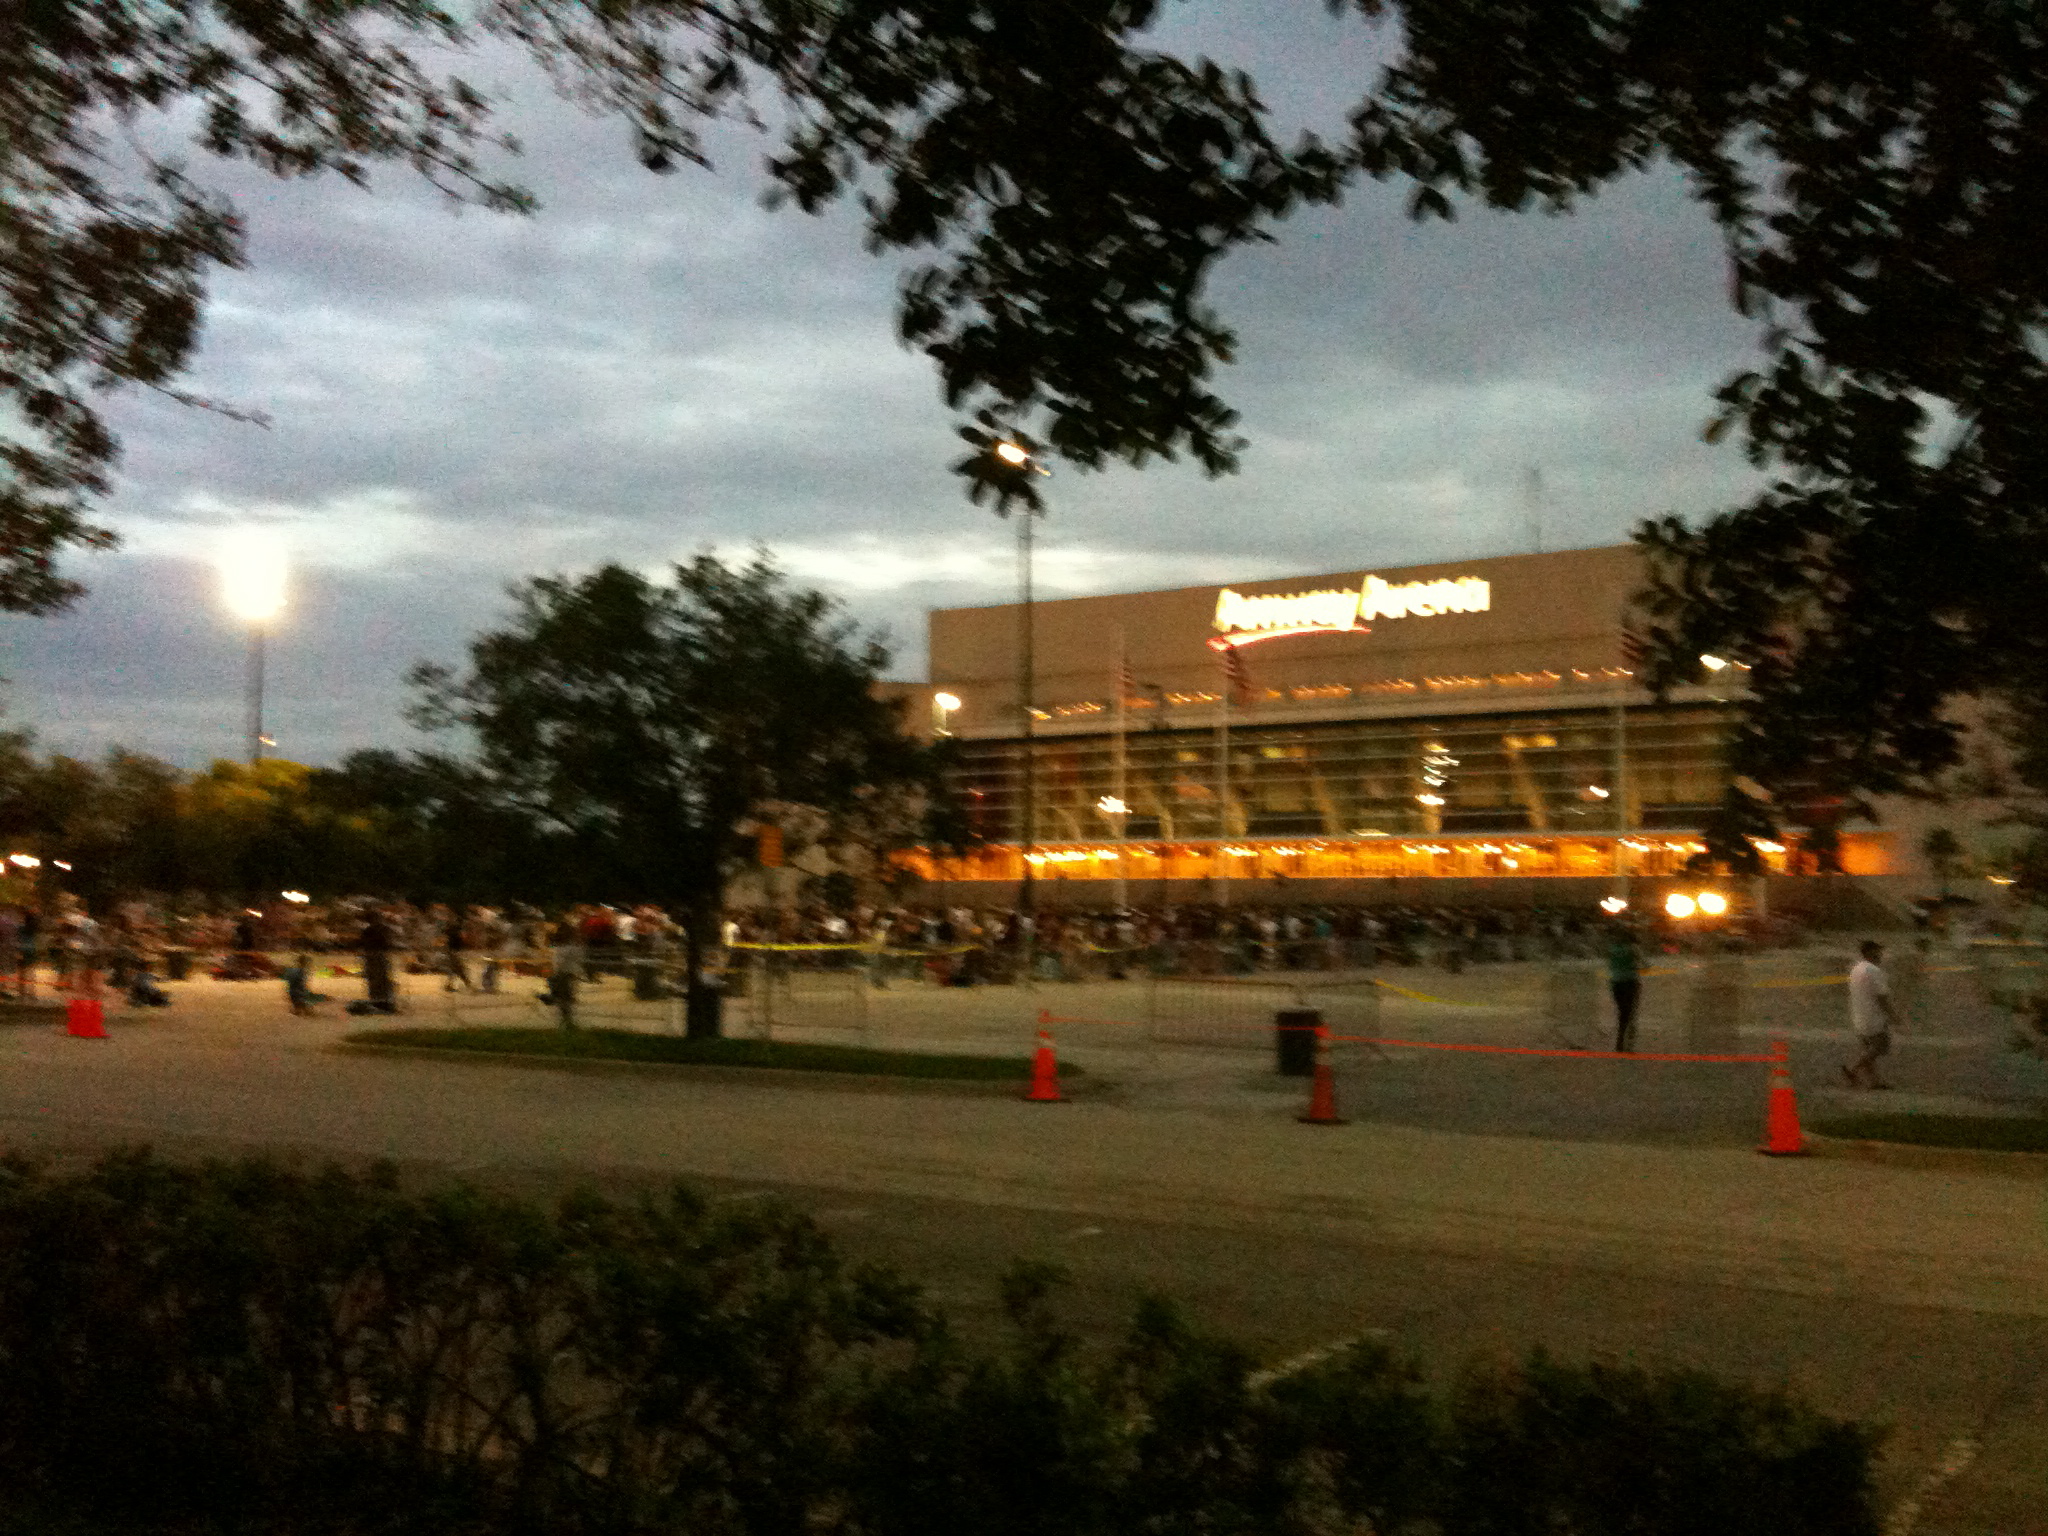 day breaks over the Amway Center